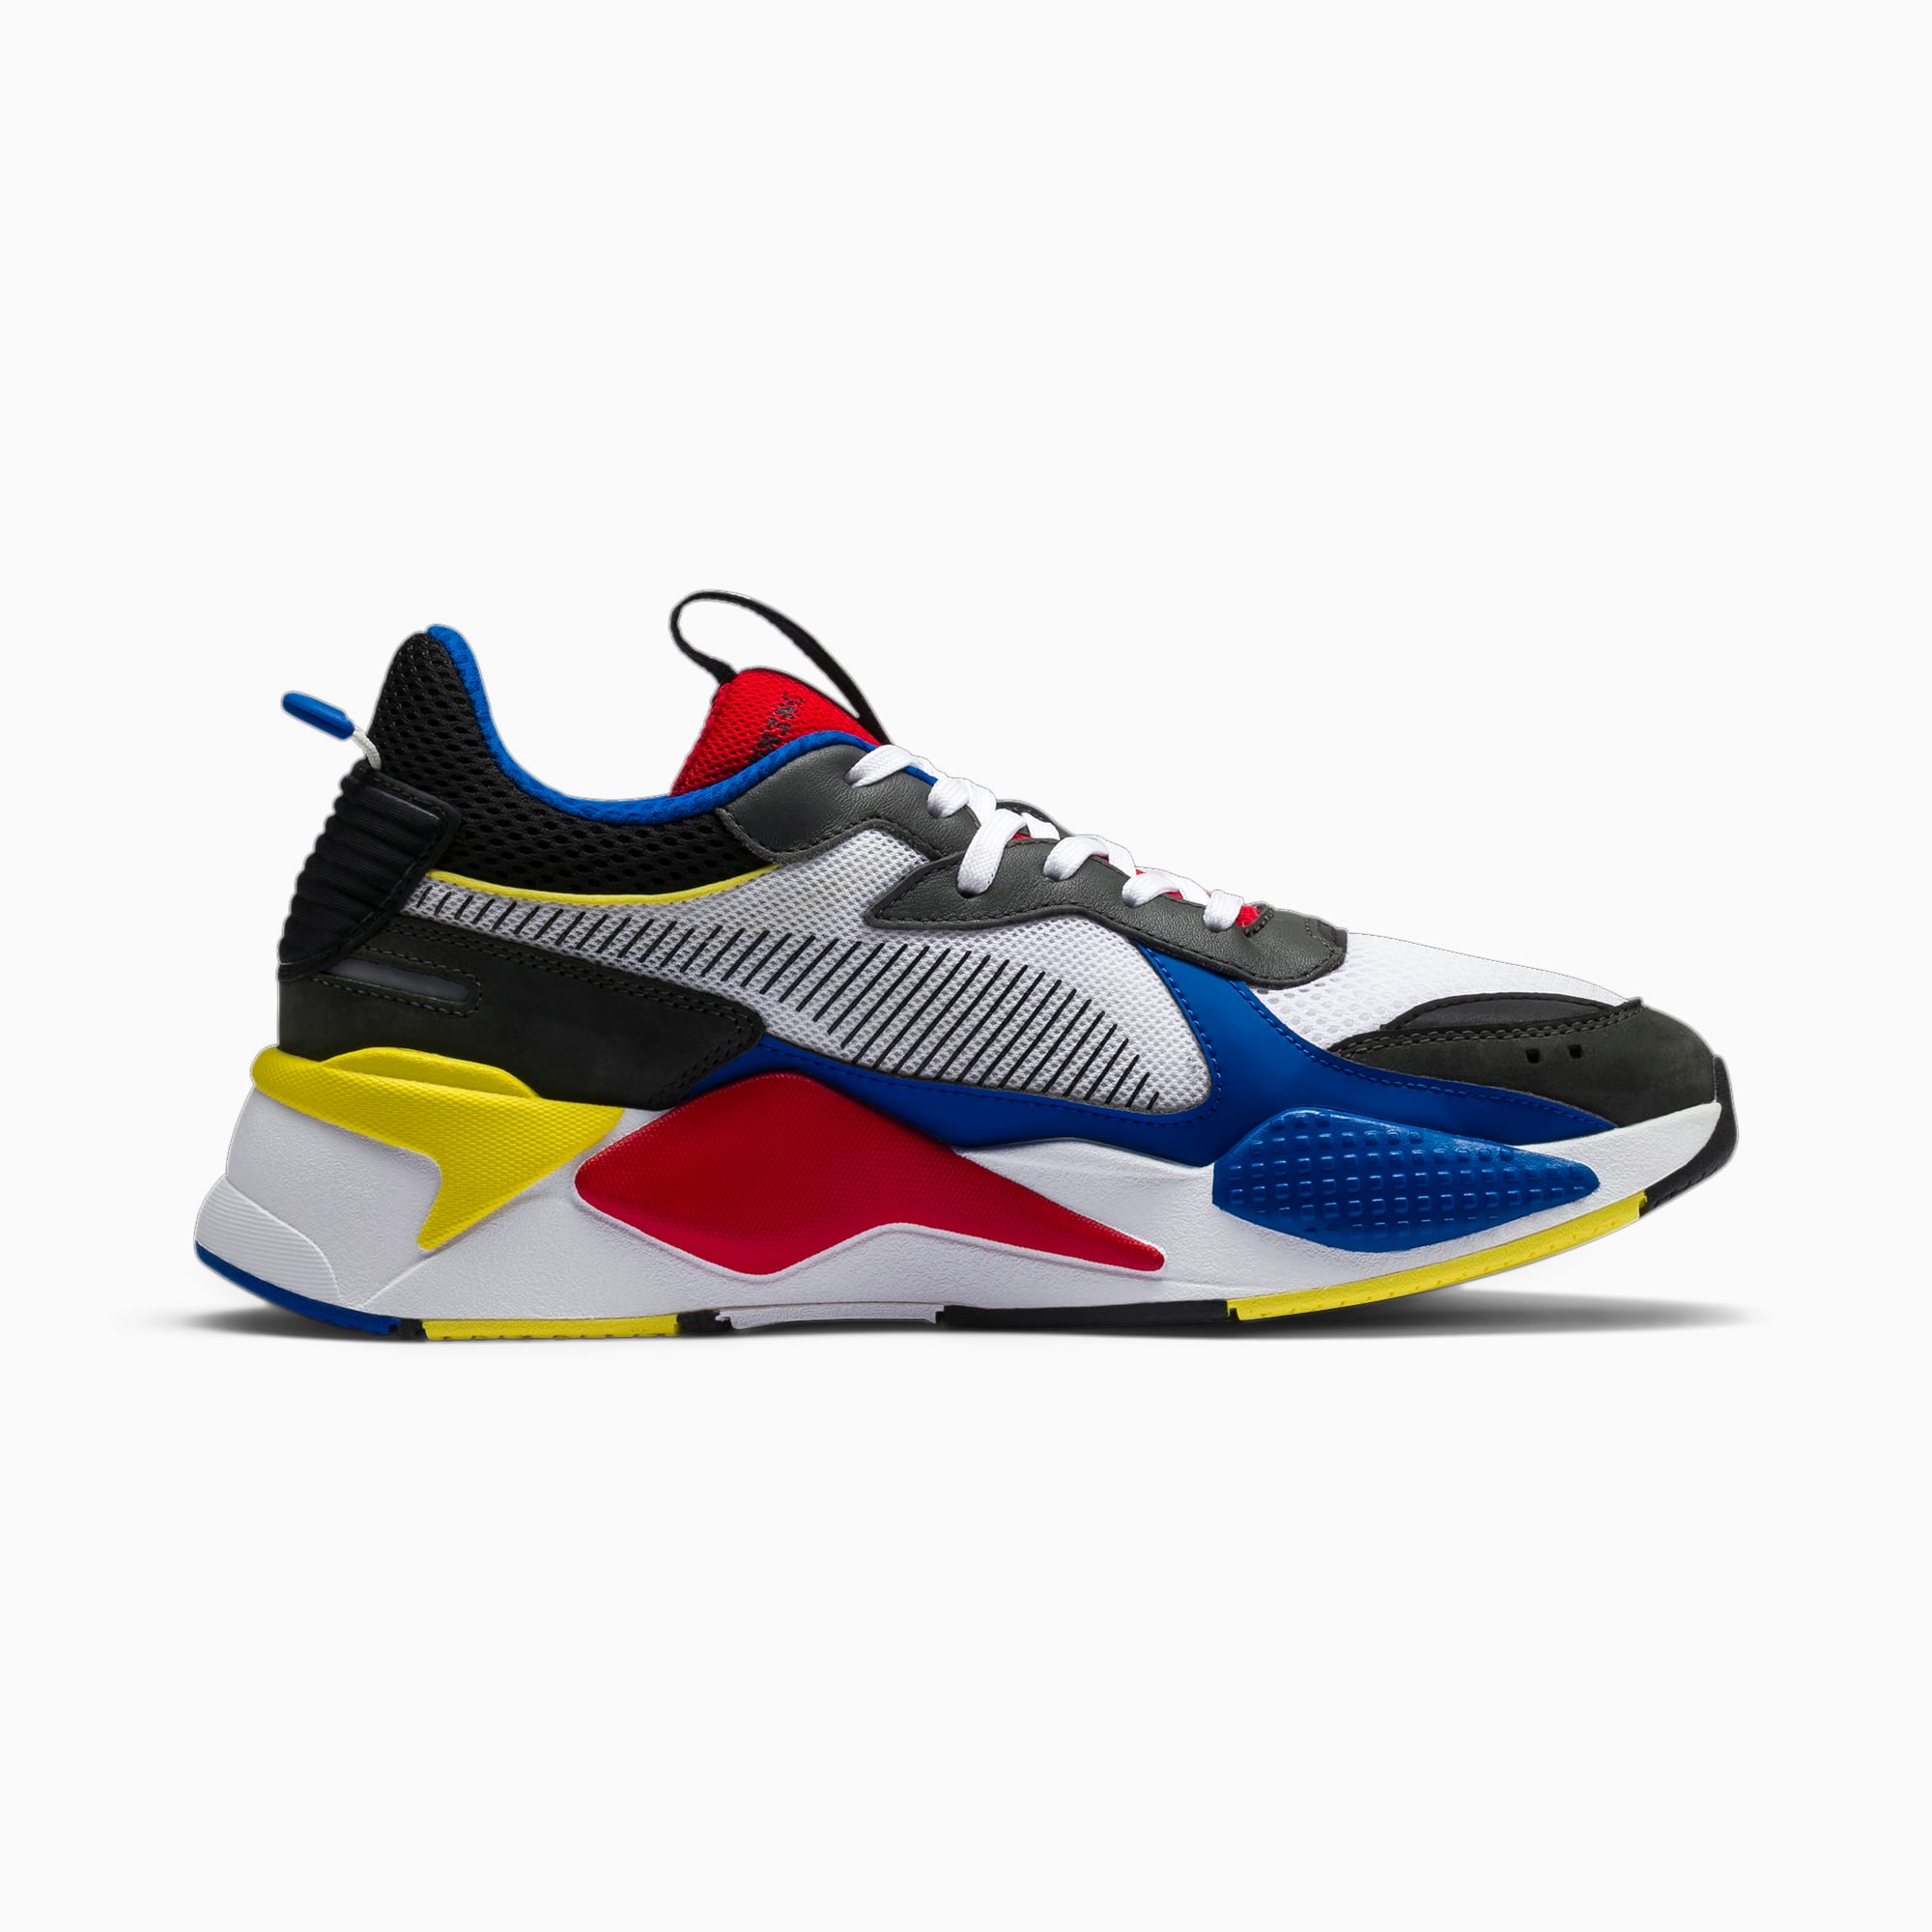 RS-X Toys Men's Sneakers | PUMA US